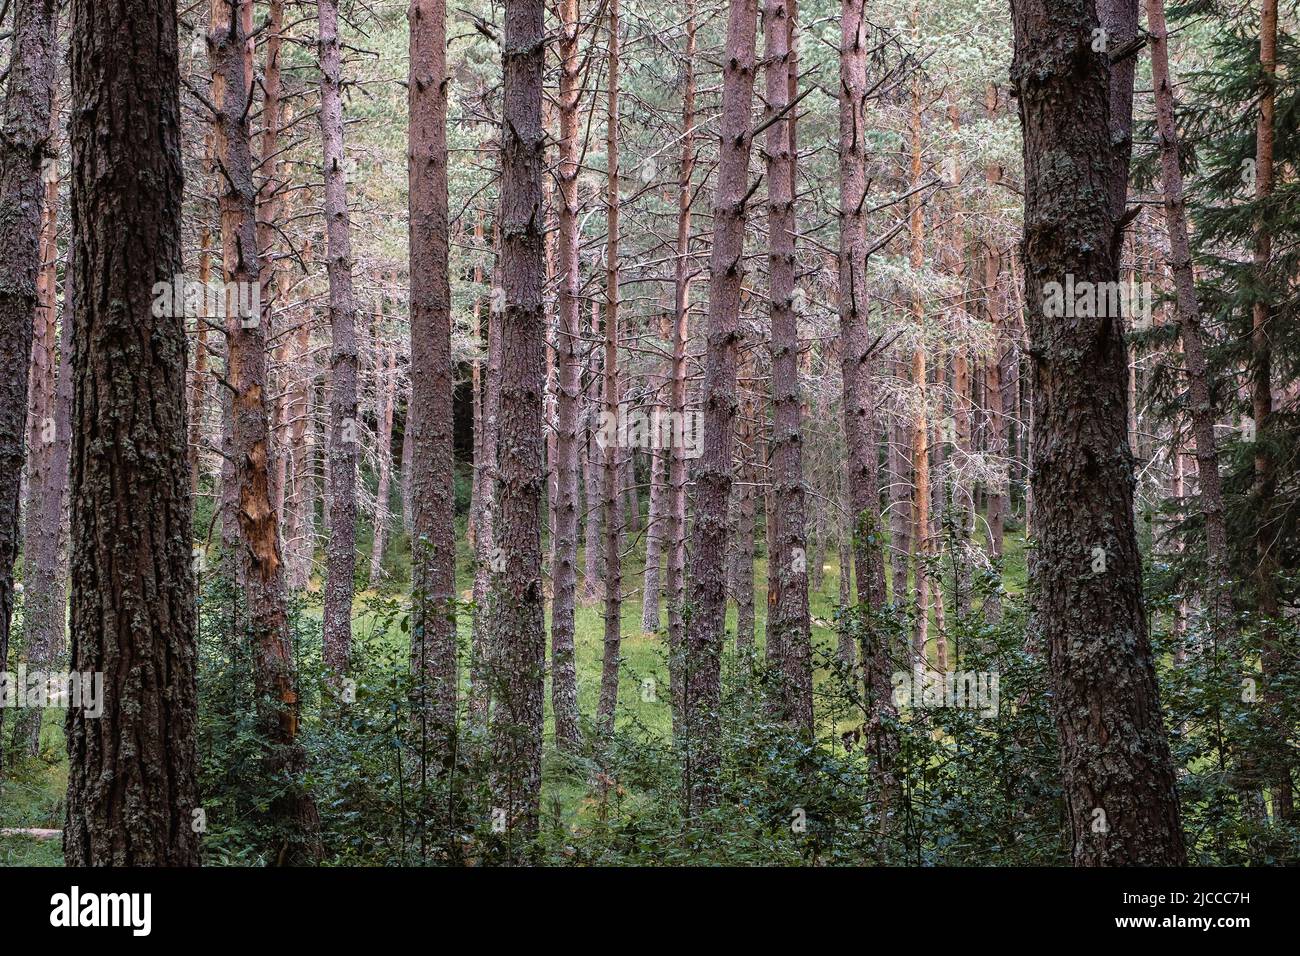 Scots pine (Pinus sylvestris) forest in the Pyrenees, Spain Stock Photo